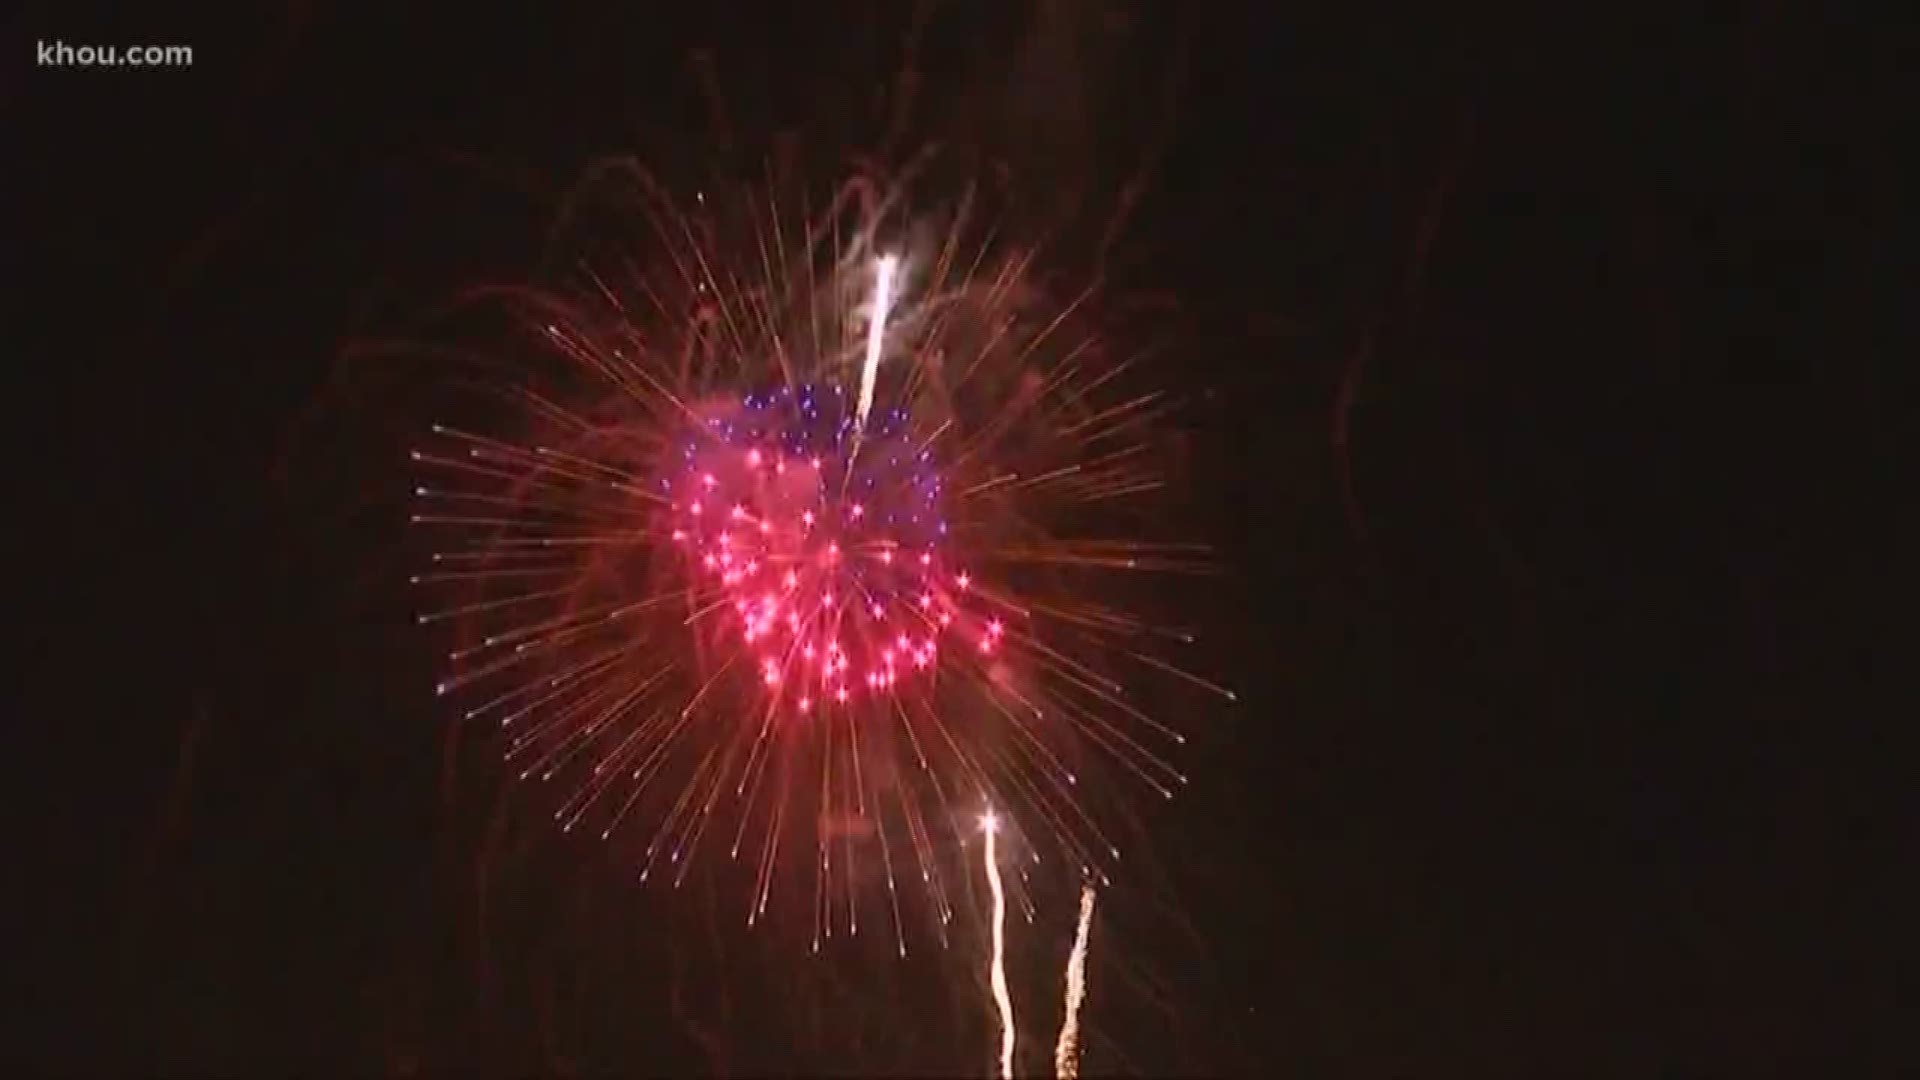 Fireworks can be a blast and plenty of people will be using them for their fourth of July celebrations, but they come with risks.